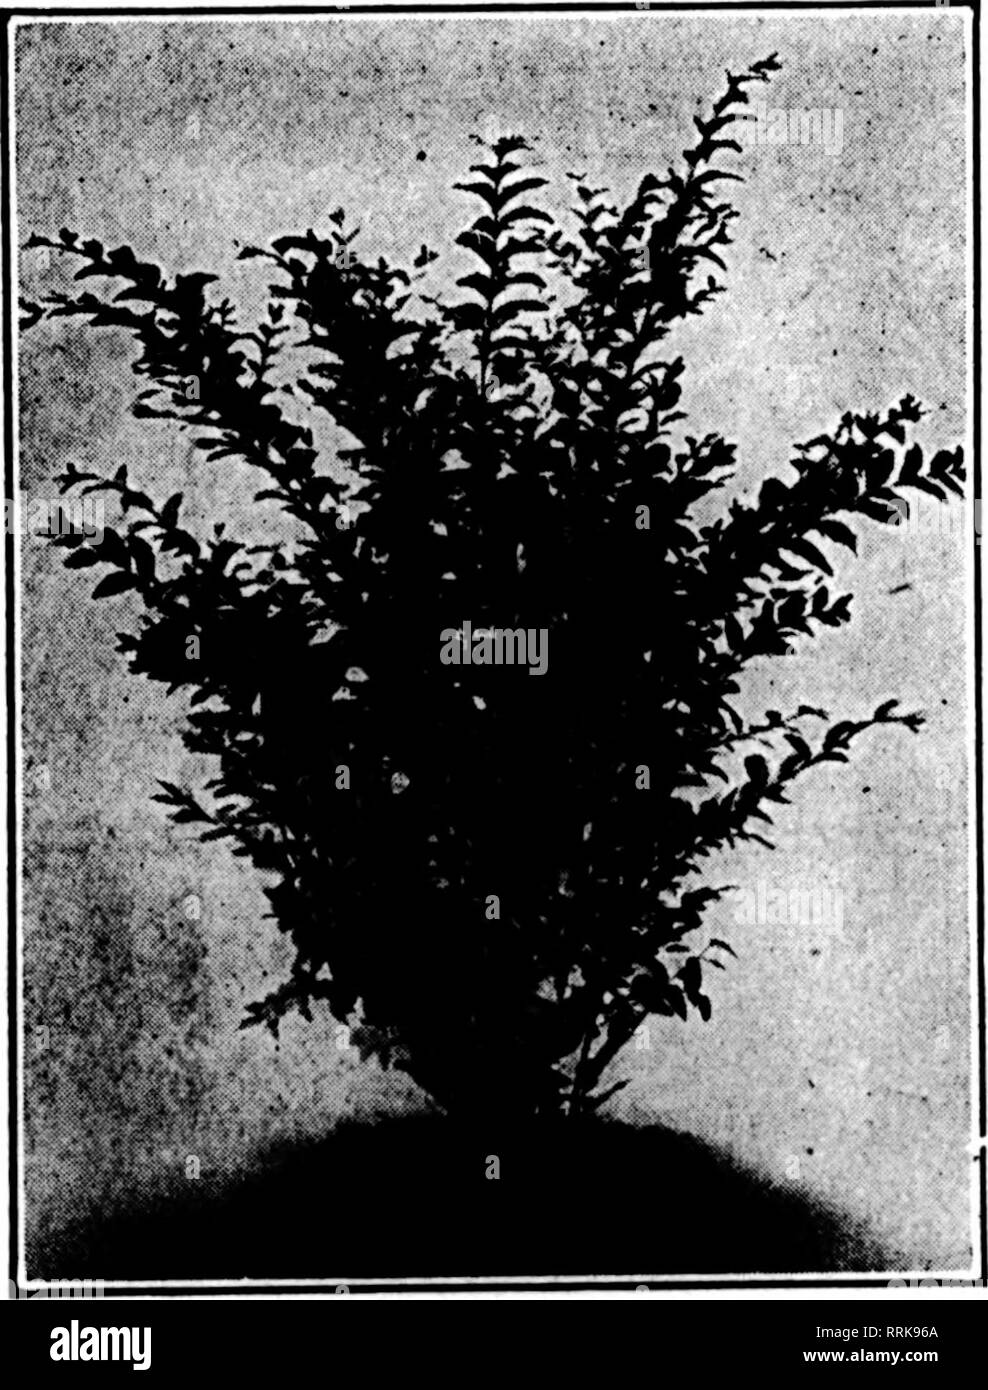 . Florists' review [microform]. Floriculture. SKI'TBMBEK 11, 1019. The Florists^ Review 91 The Elm City Nursery Co., Woodmont Nurseries, Inc., New Haven, Conn. IBuLIUMi'^ H ^I^^V ^B^^ ^^^^1 ^1 ^B^^ H ^V H Resembles ^&quot; ^^^^^ ^^^^ ^^^^^ ^&quot; ^^^ ^ ^&quot; ^&quot; with this nHrlAfI aWvantaw, Privet Privet in Habit with this added advantage: — It's as HARDY as IBOTA Privet and will succeed wherever IBOTA thrives. Name, IBOLIUM, coined thusi—IBO from Ibota and LIUM from Ovalifolium REGISTRATION Society of American Florists Aprils, 1919. IHOLIUM Privet is the product of crossing the Californ Stock Photo